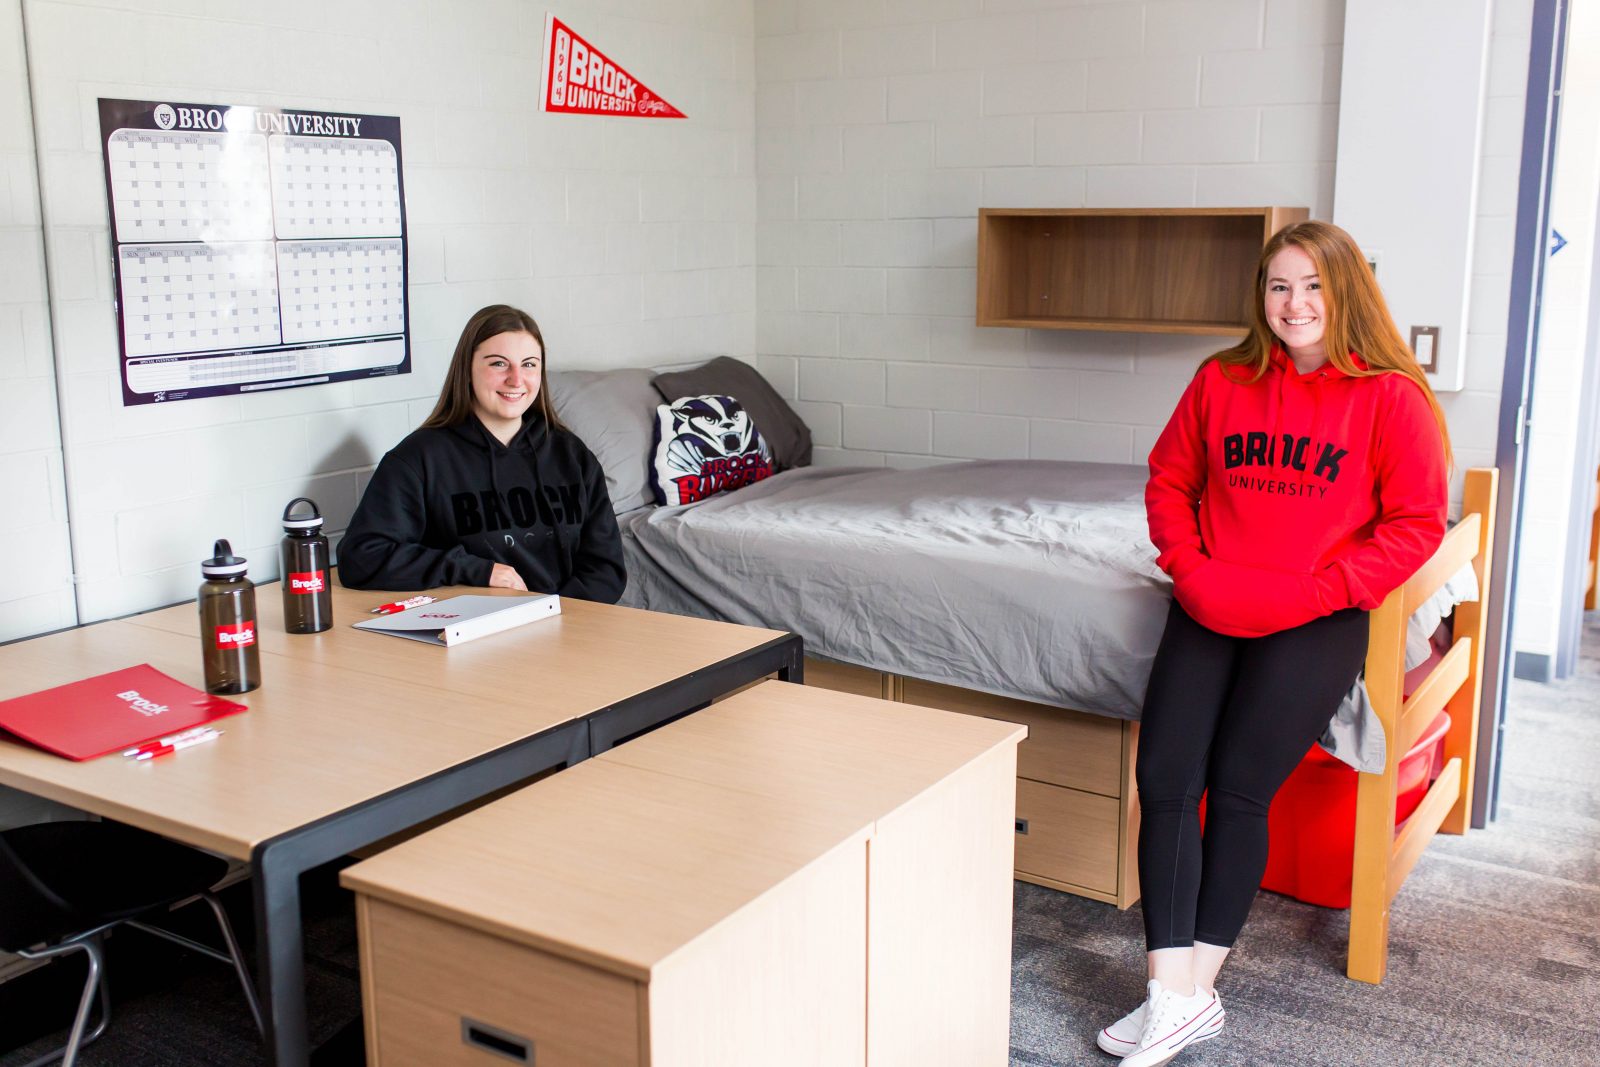 Two female roommates in a university dorm room. One is seated behind a desk and the other is leaning against the bed.